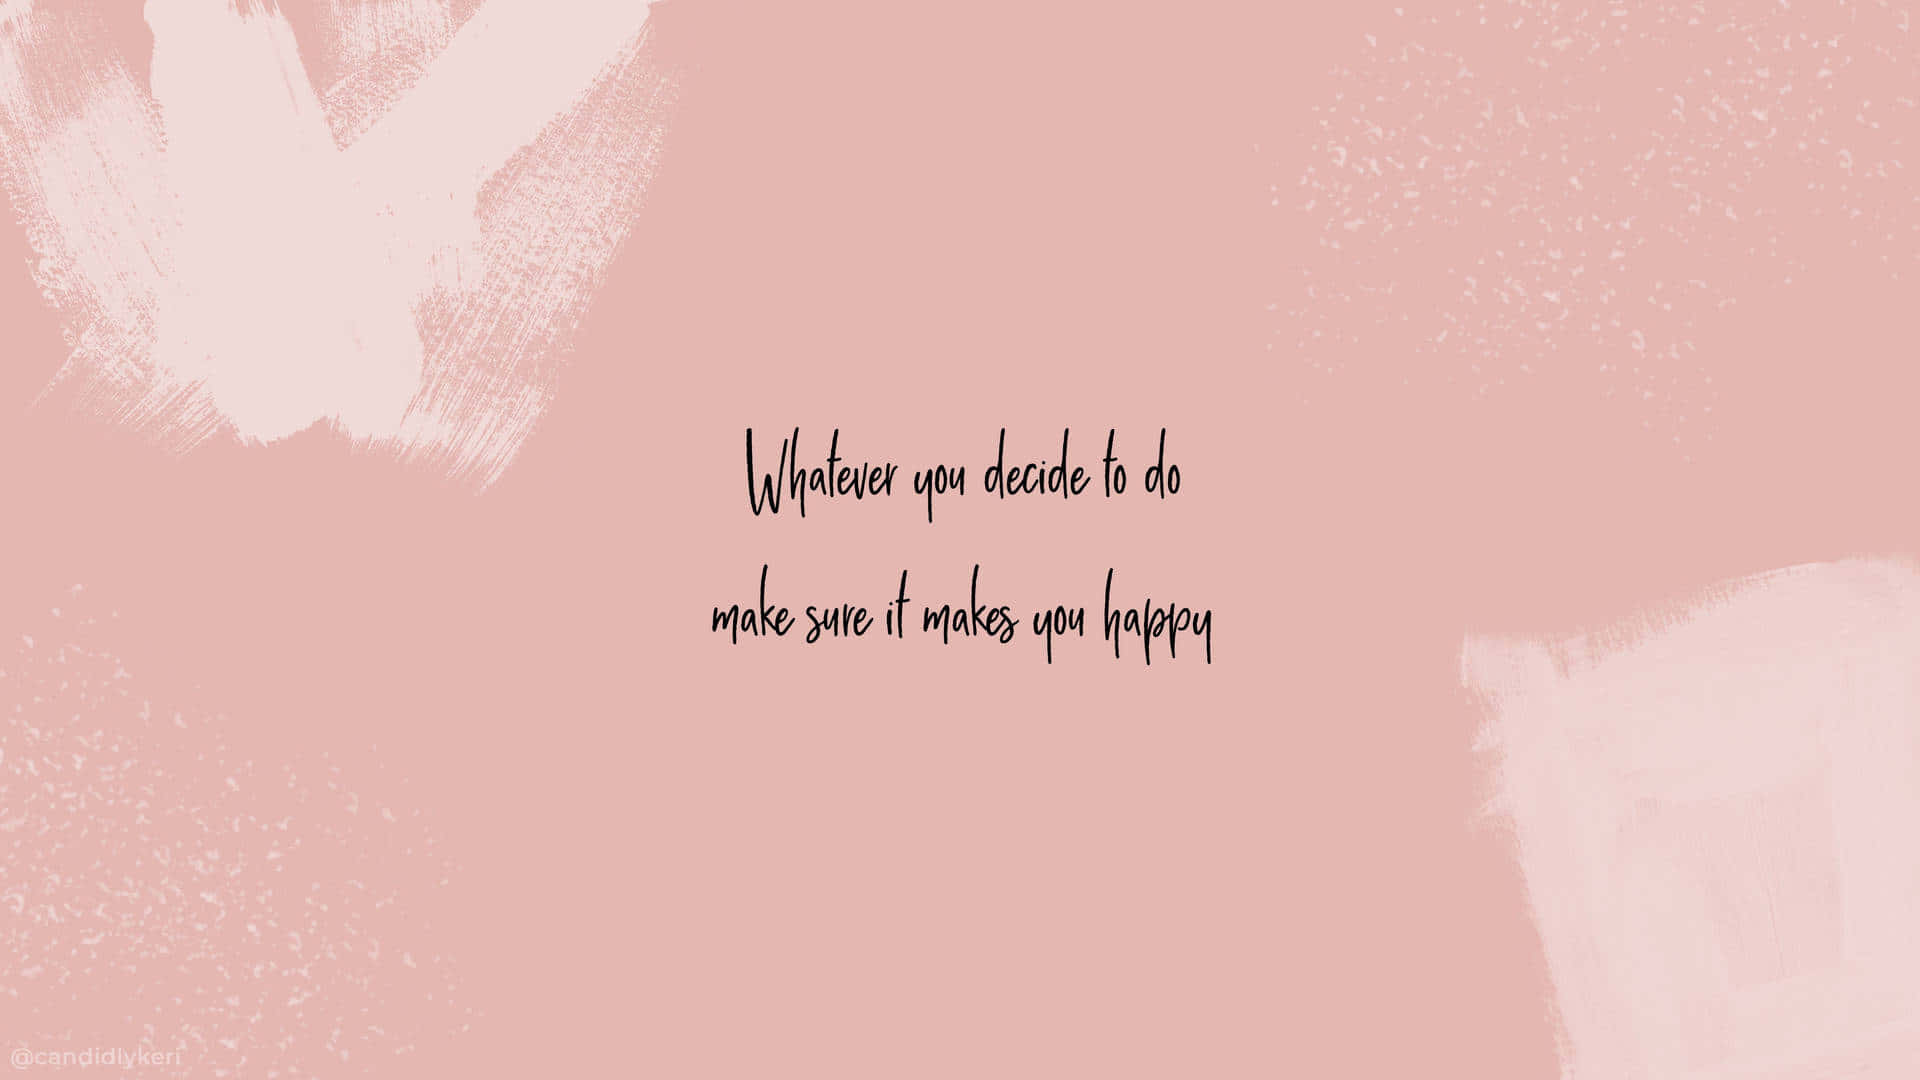 Happiness Mantra Pink Background Wallpaper